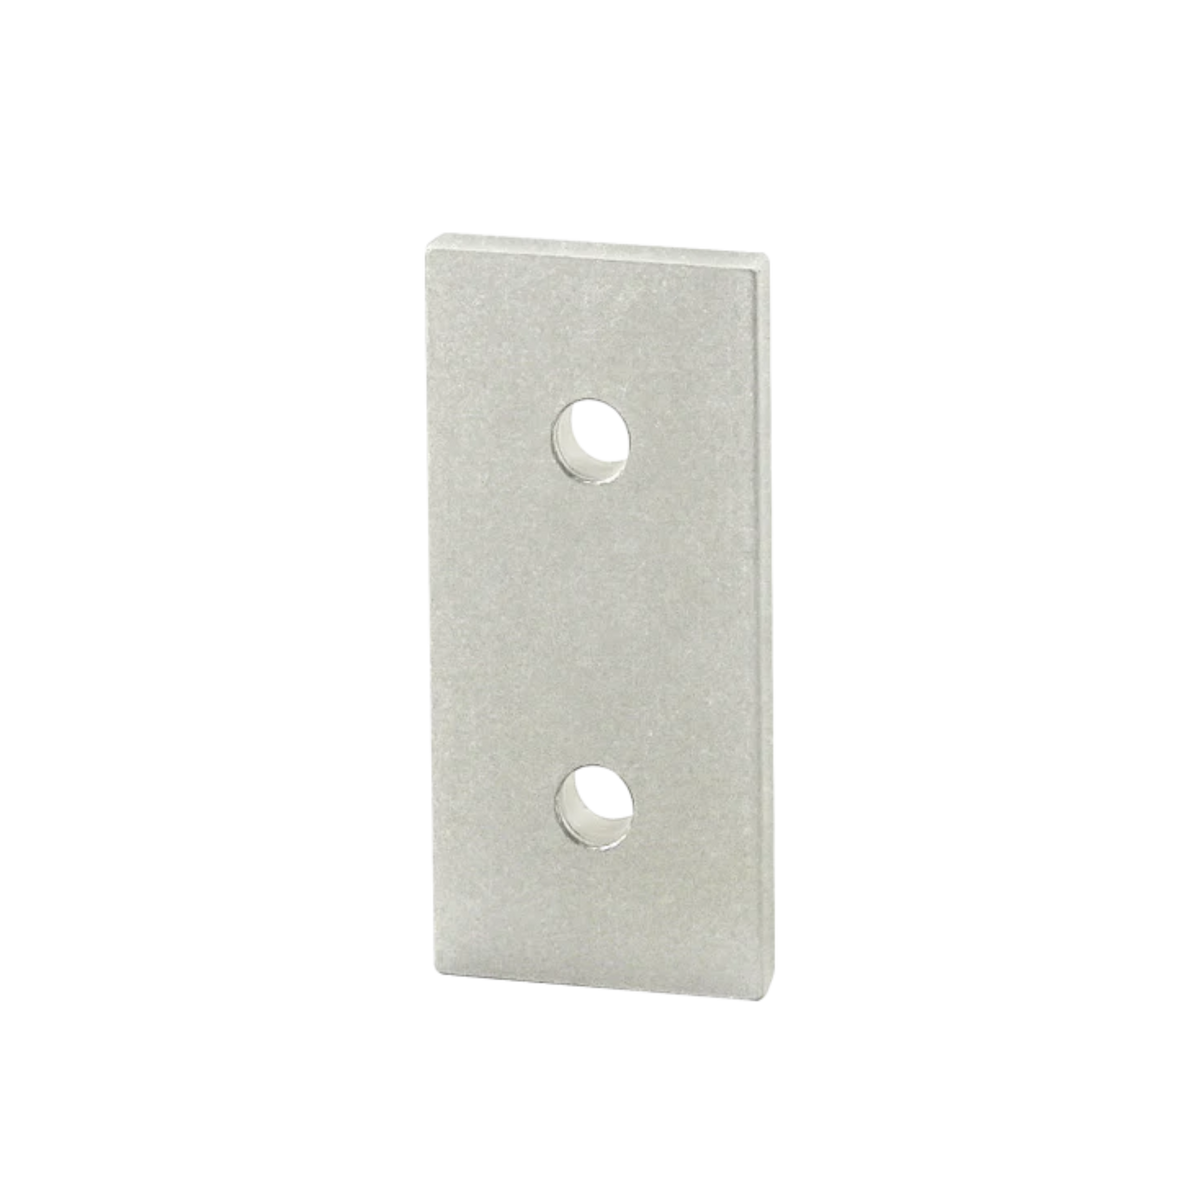 upright rectangular flat plate with two mounting holes